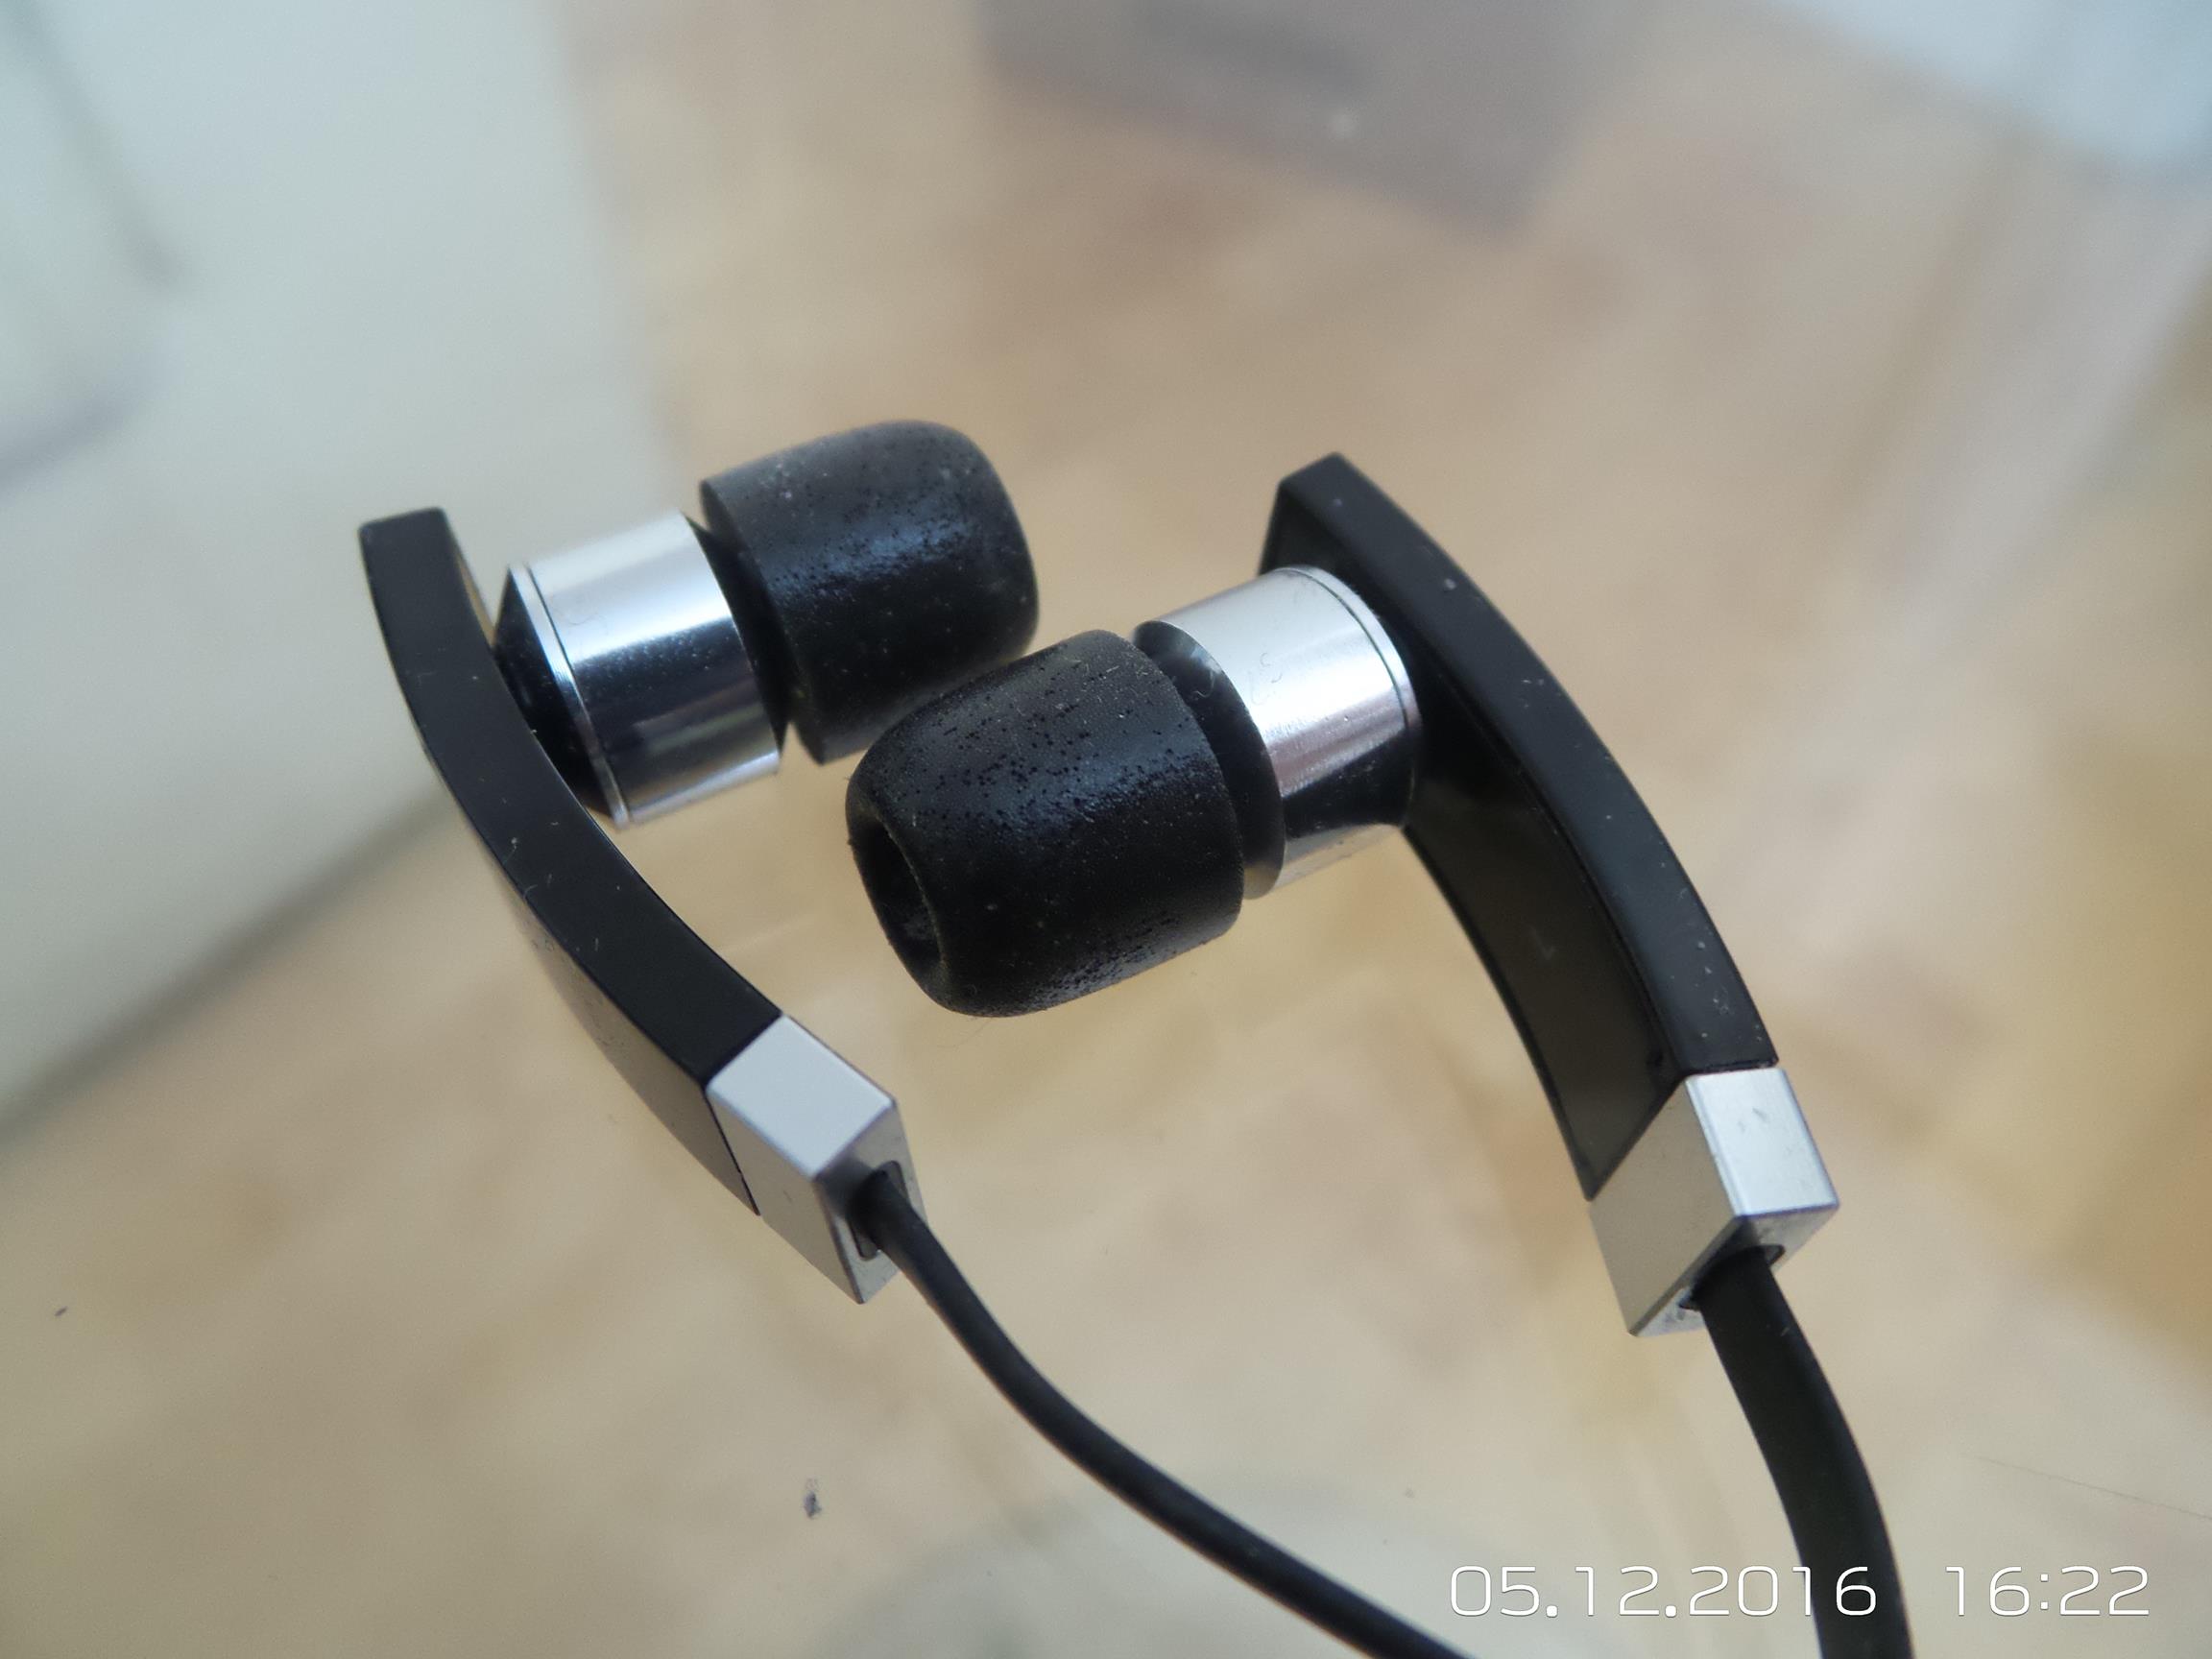 Accutone Pisces Earphone Review